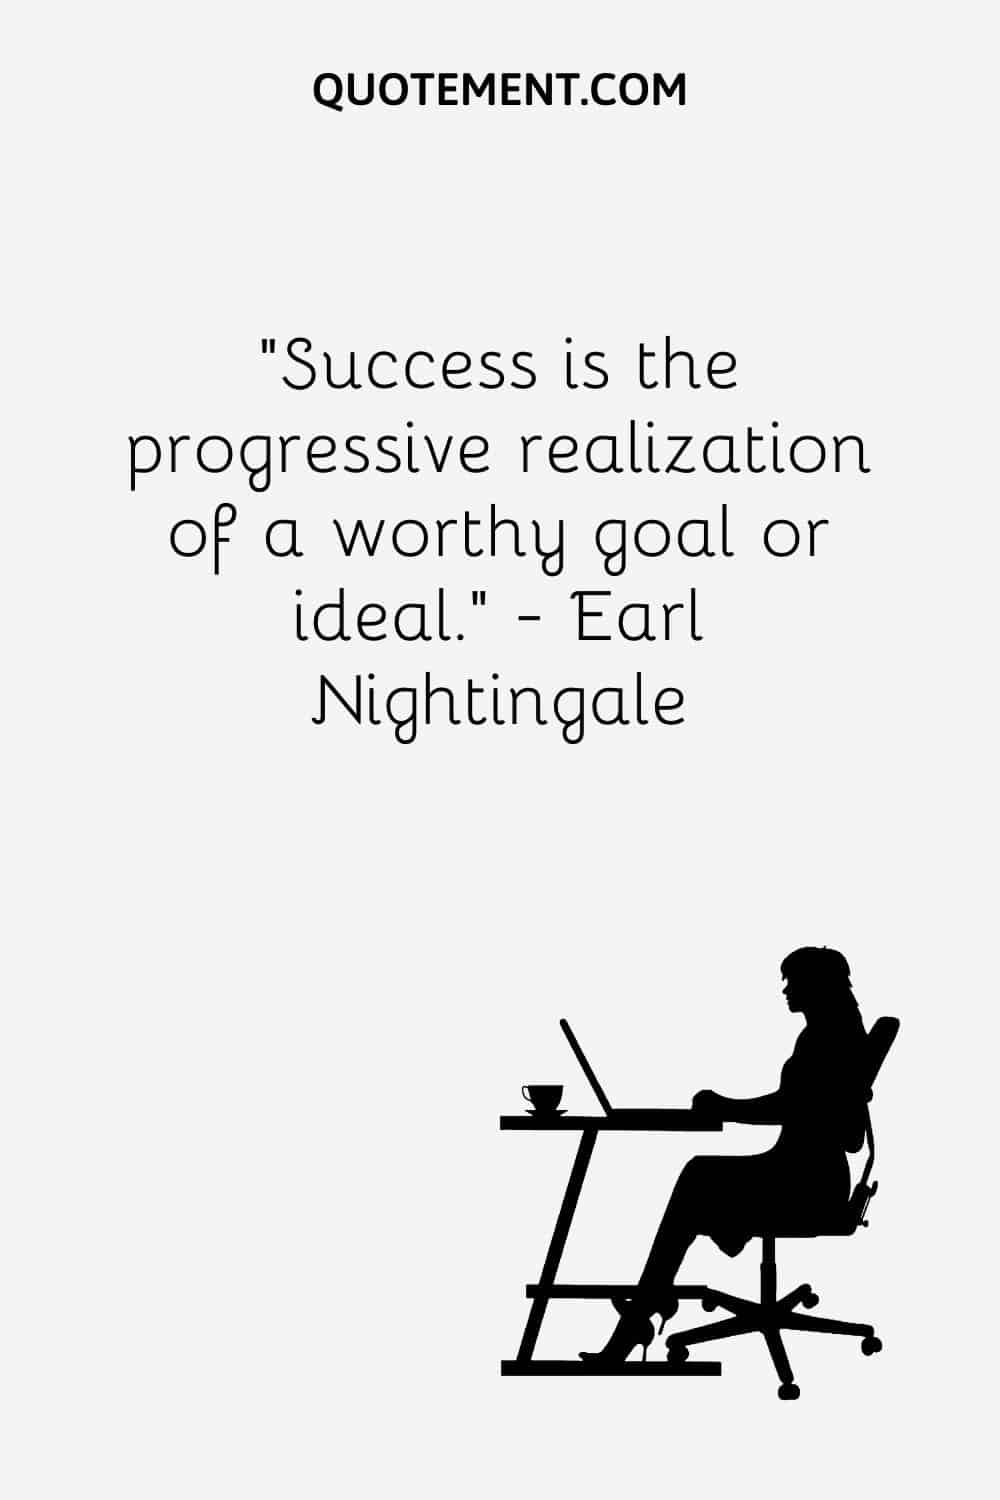 Success is the progressive realization of a worthy goal or ideal